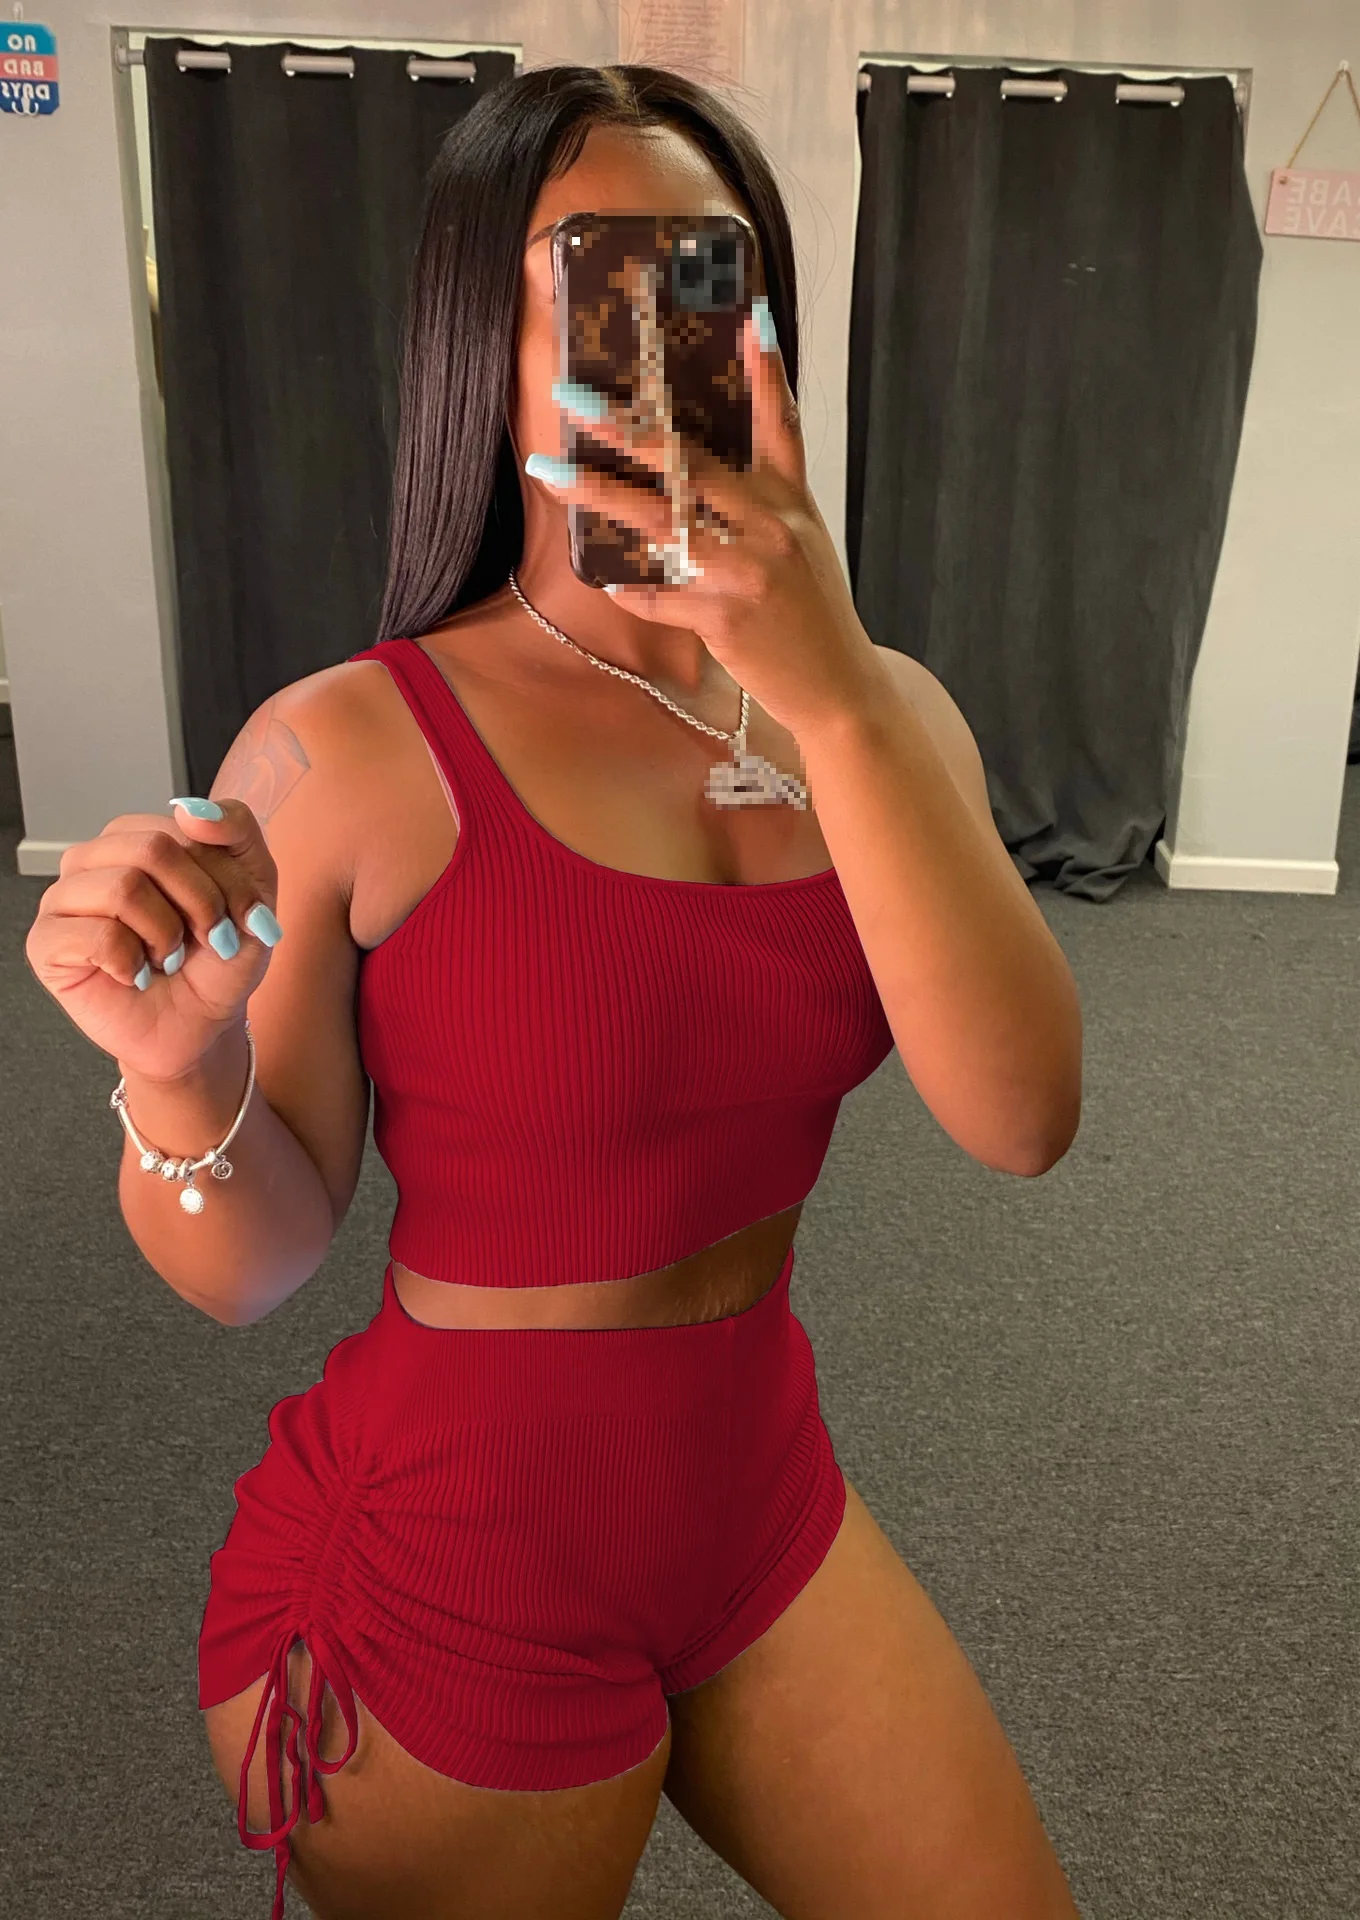 loungewear sets two piece set women 2 piece sets women outfits shorts set women spring summer 2021summer clothes short suits club outfit plus size bra and panty sets Women's Sets